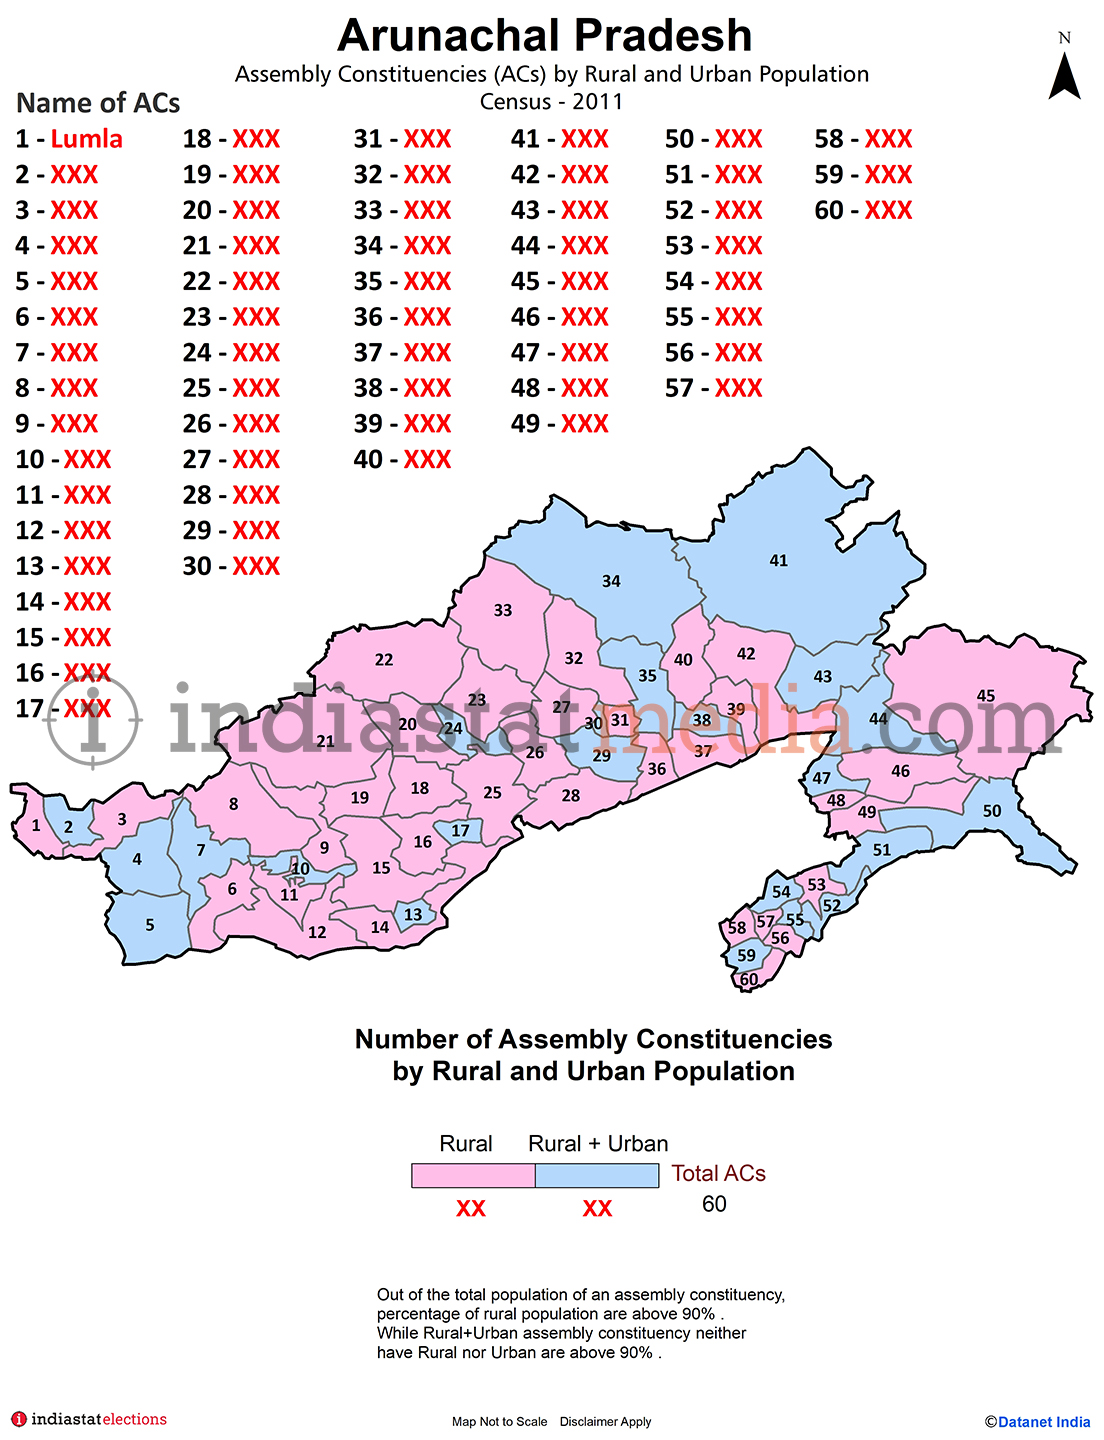 Assembly Constituencies by Rural and Urban Population in Arunachal Pradesh - Census 2011